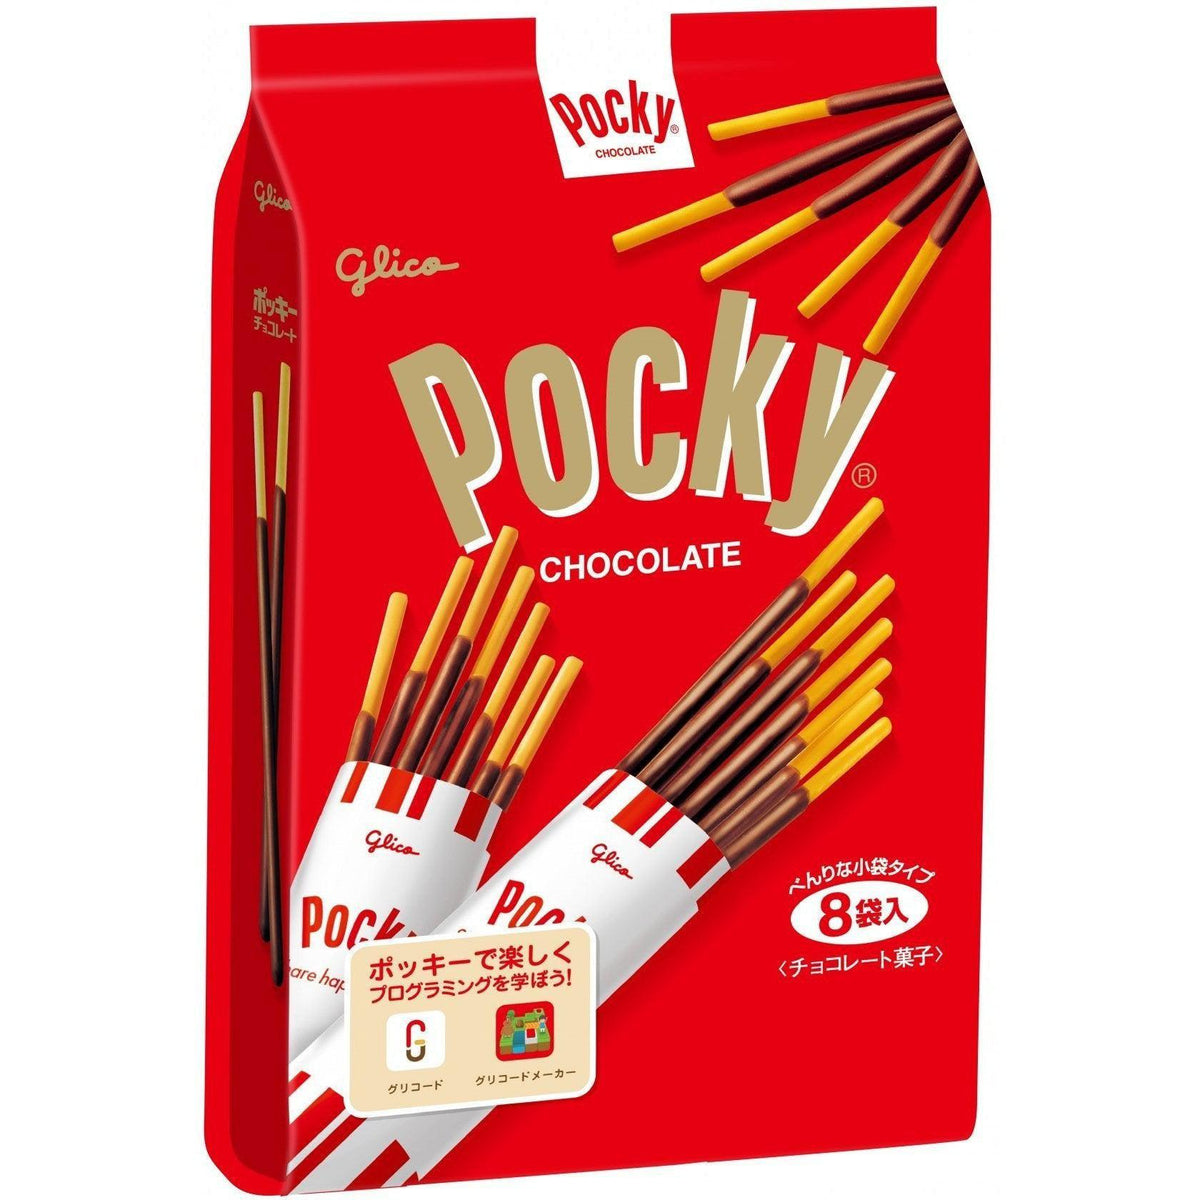 Glico Pocky Chocolate Biscuit Sticks (Pack of 6) – Japanese Taste